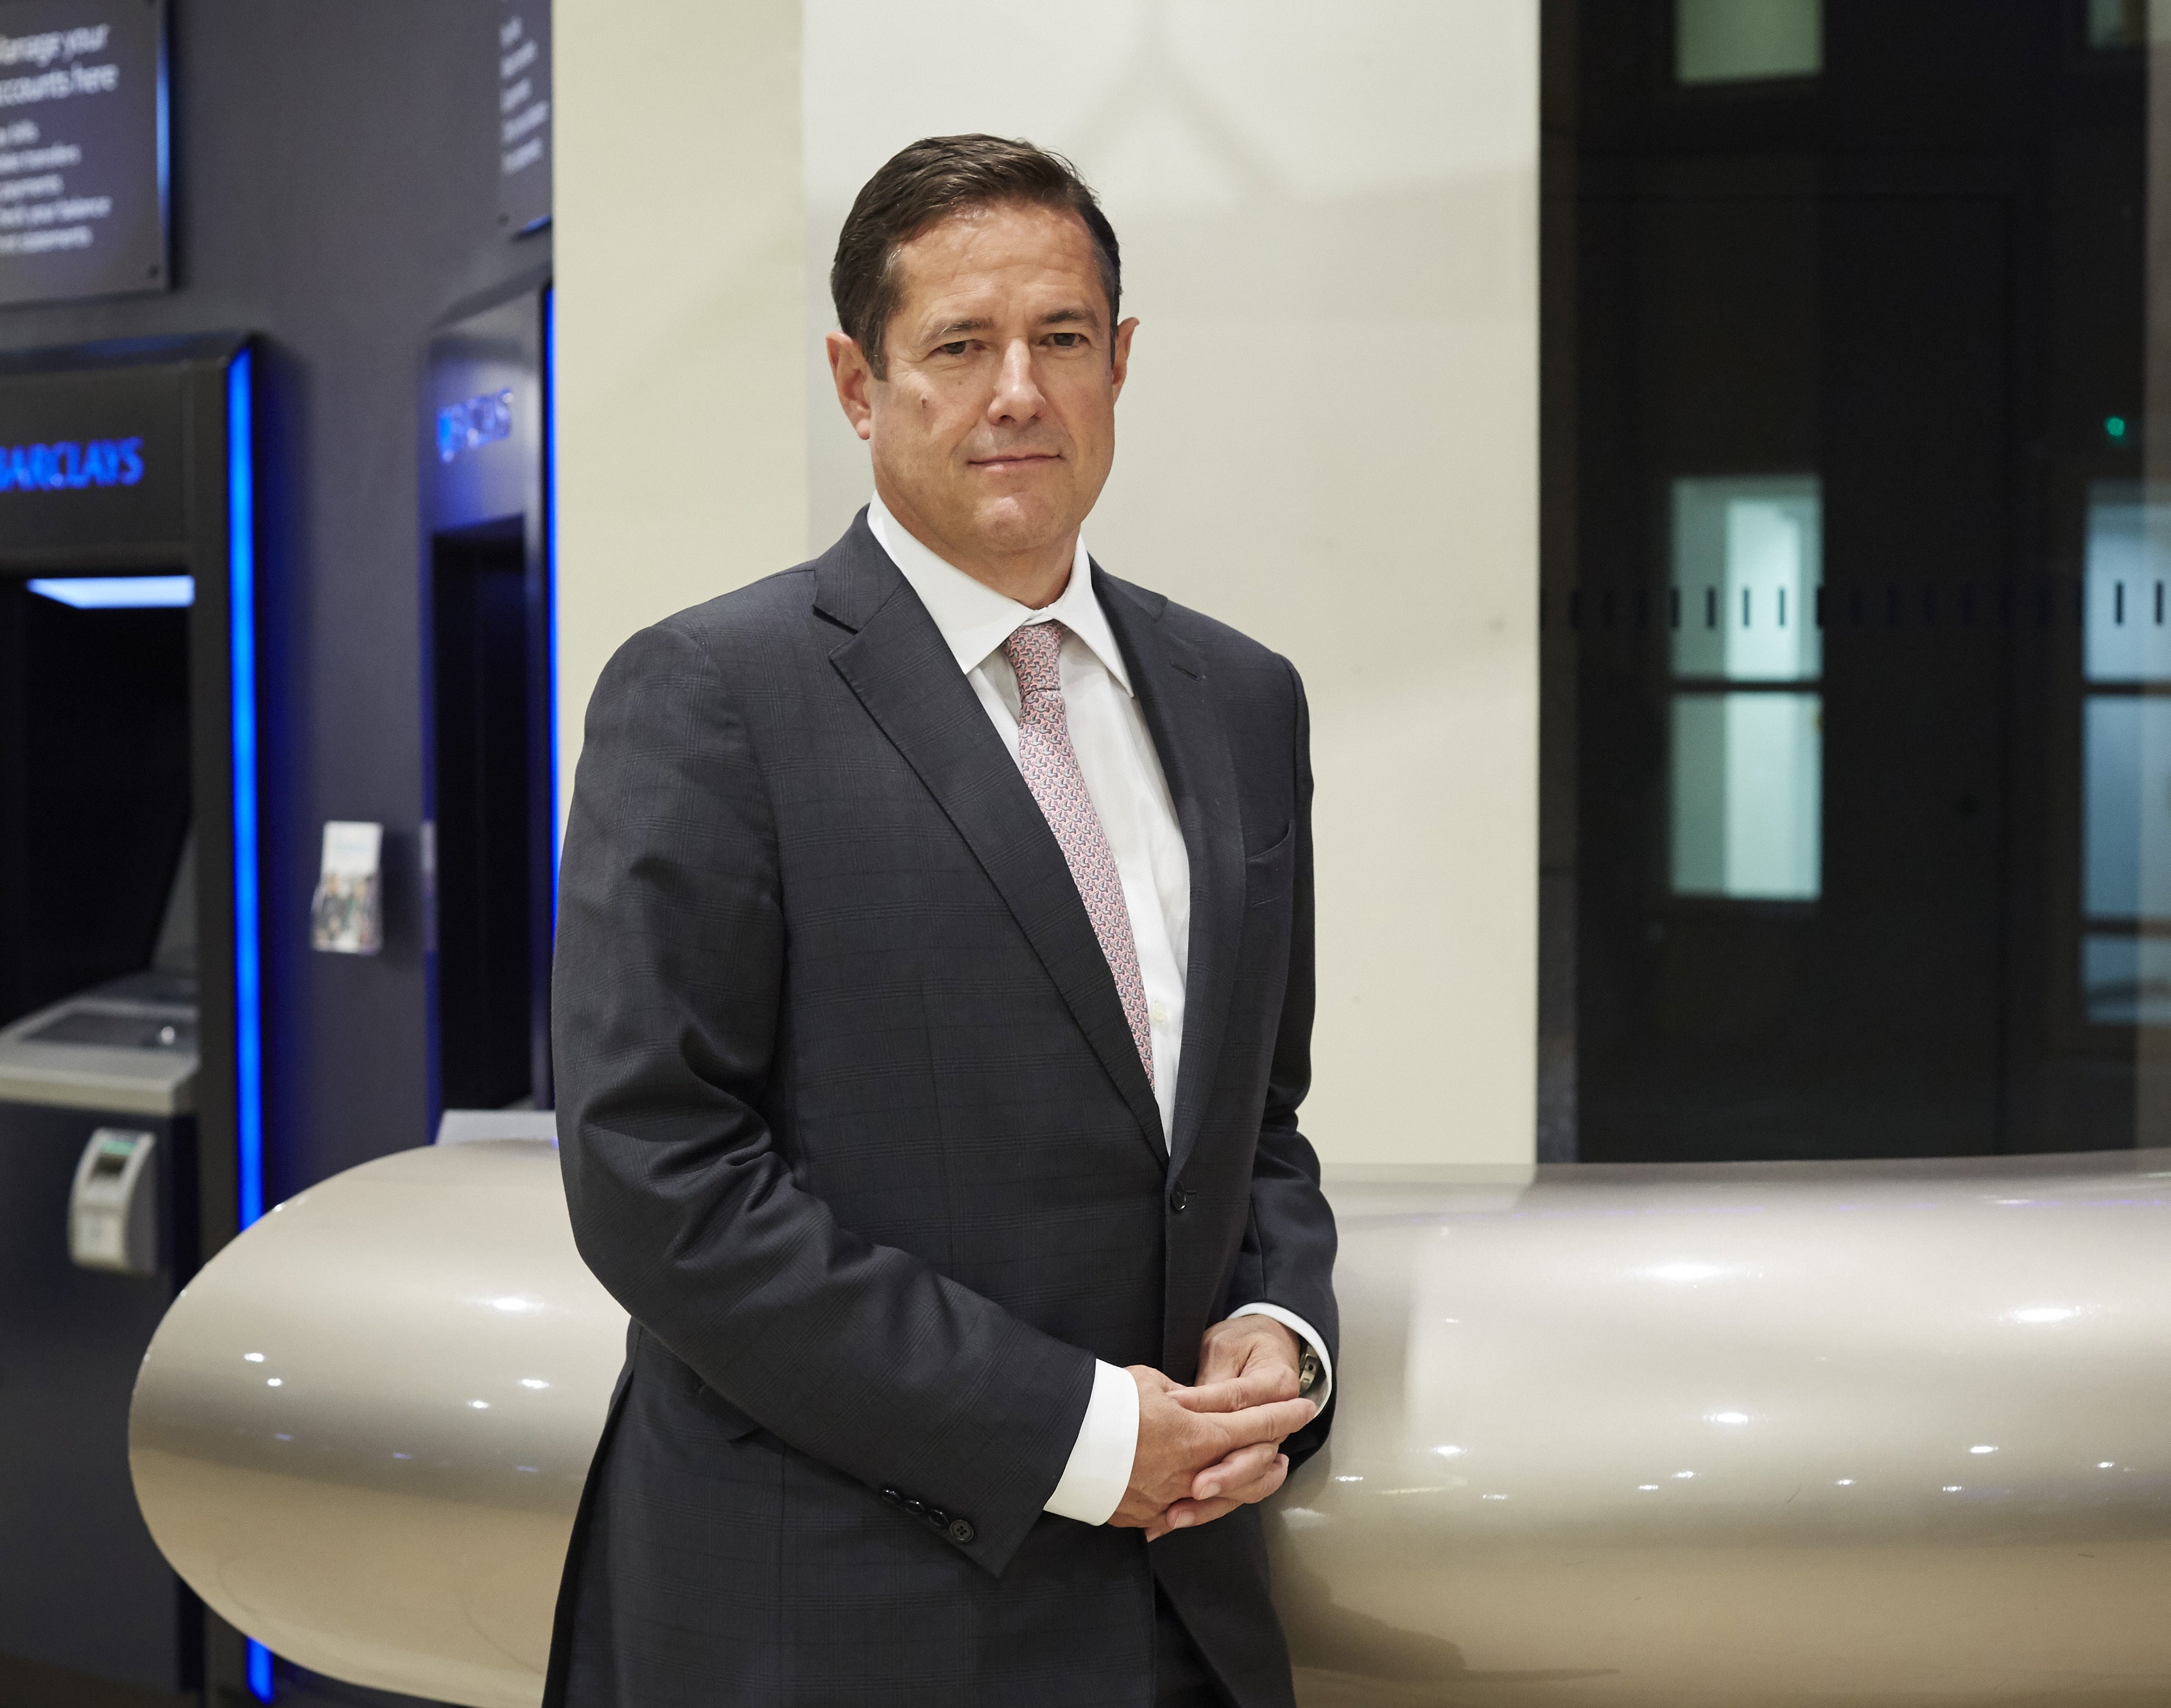 <p>Barclays has frozen millions of pounds in bonus share awards made to former boss Jes Staley amid an investigation into his relationship with disgraced financier and convicted sex offender Jeffrey Epstein</p>